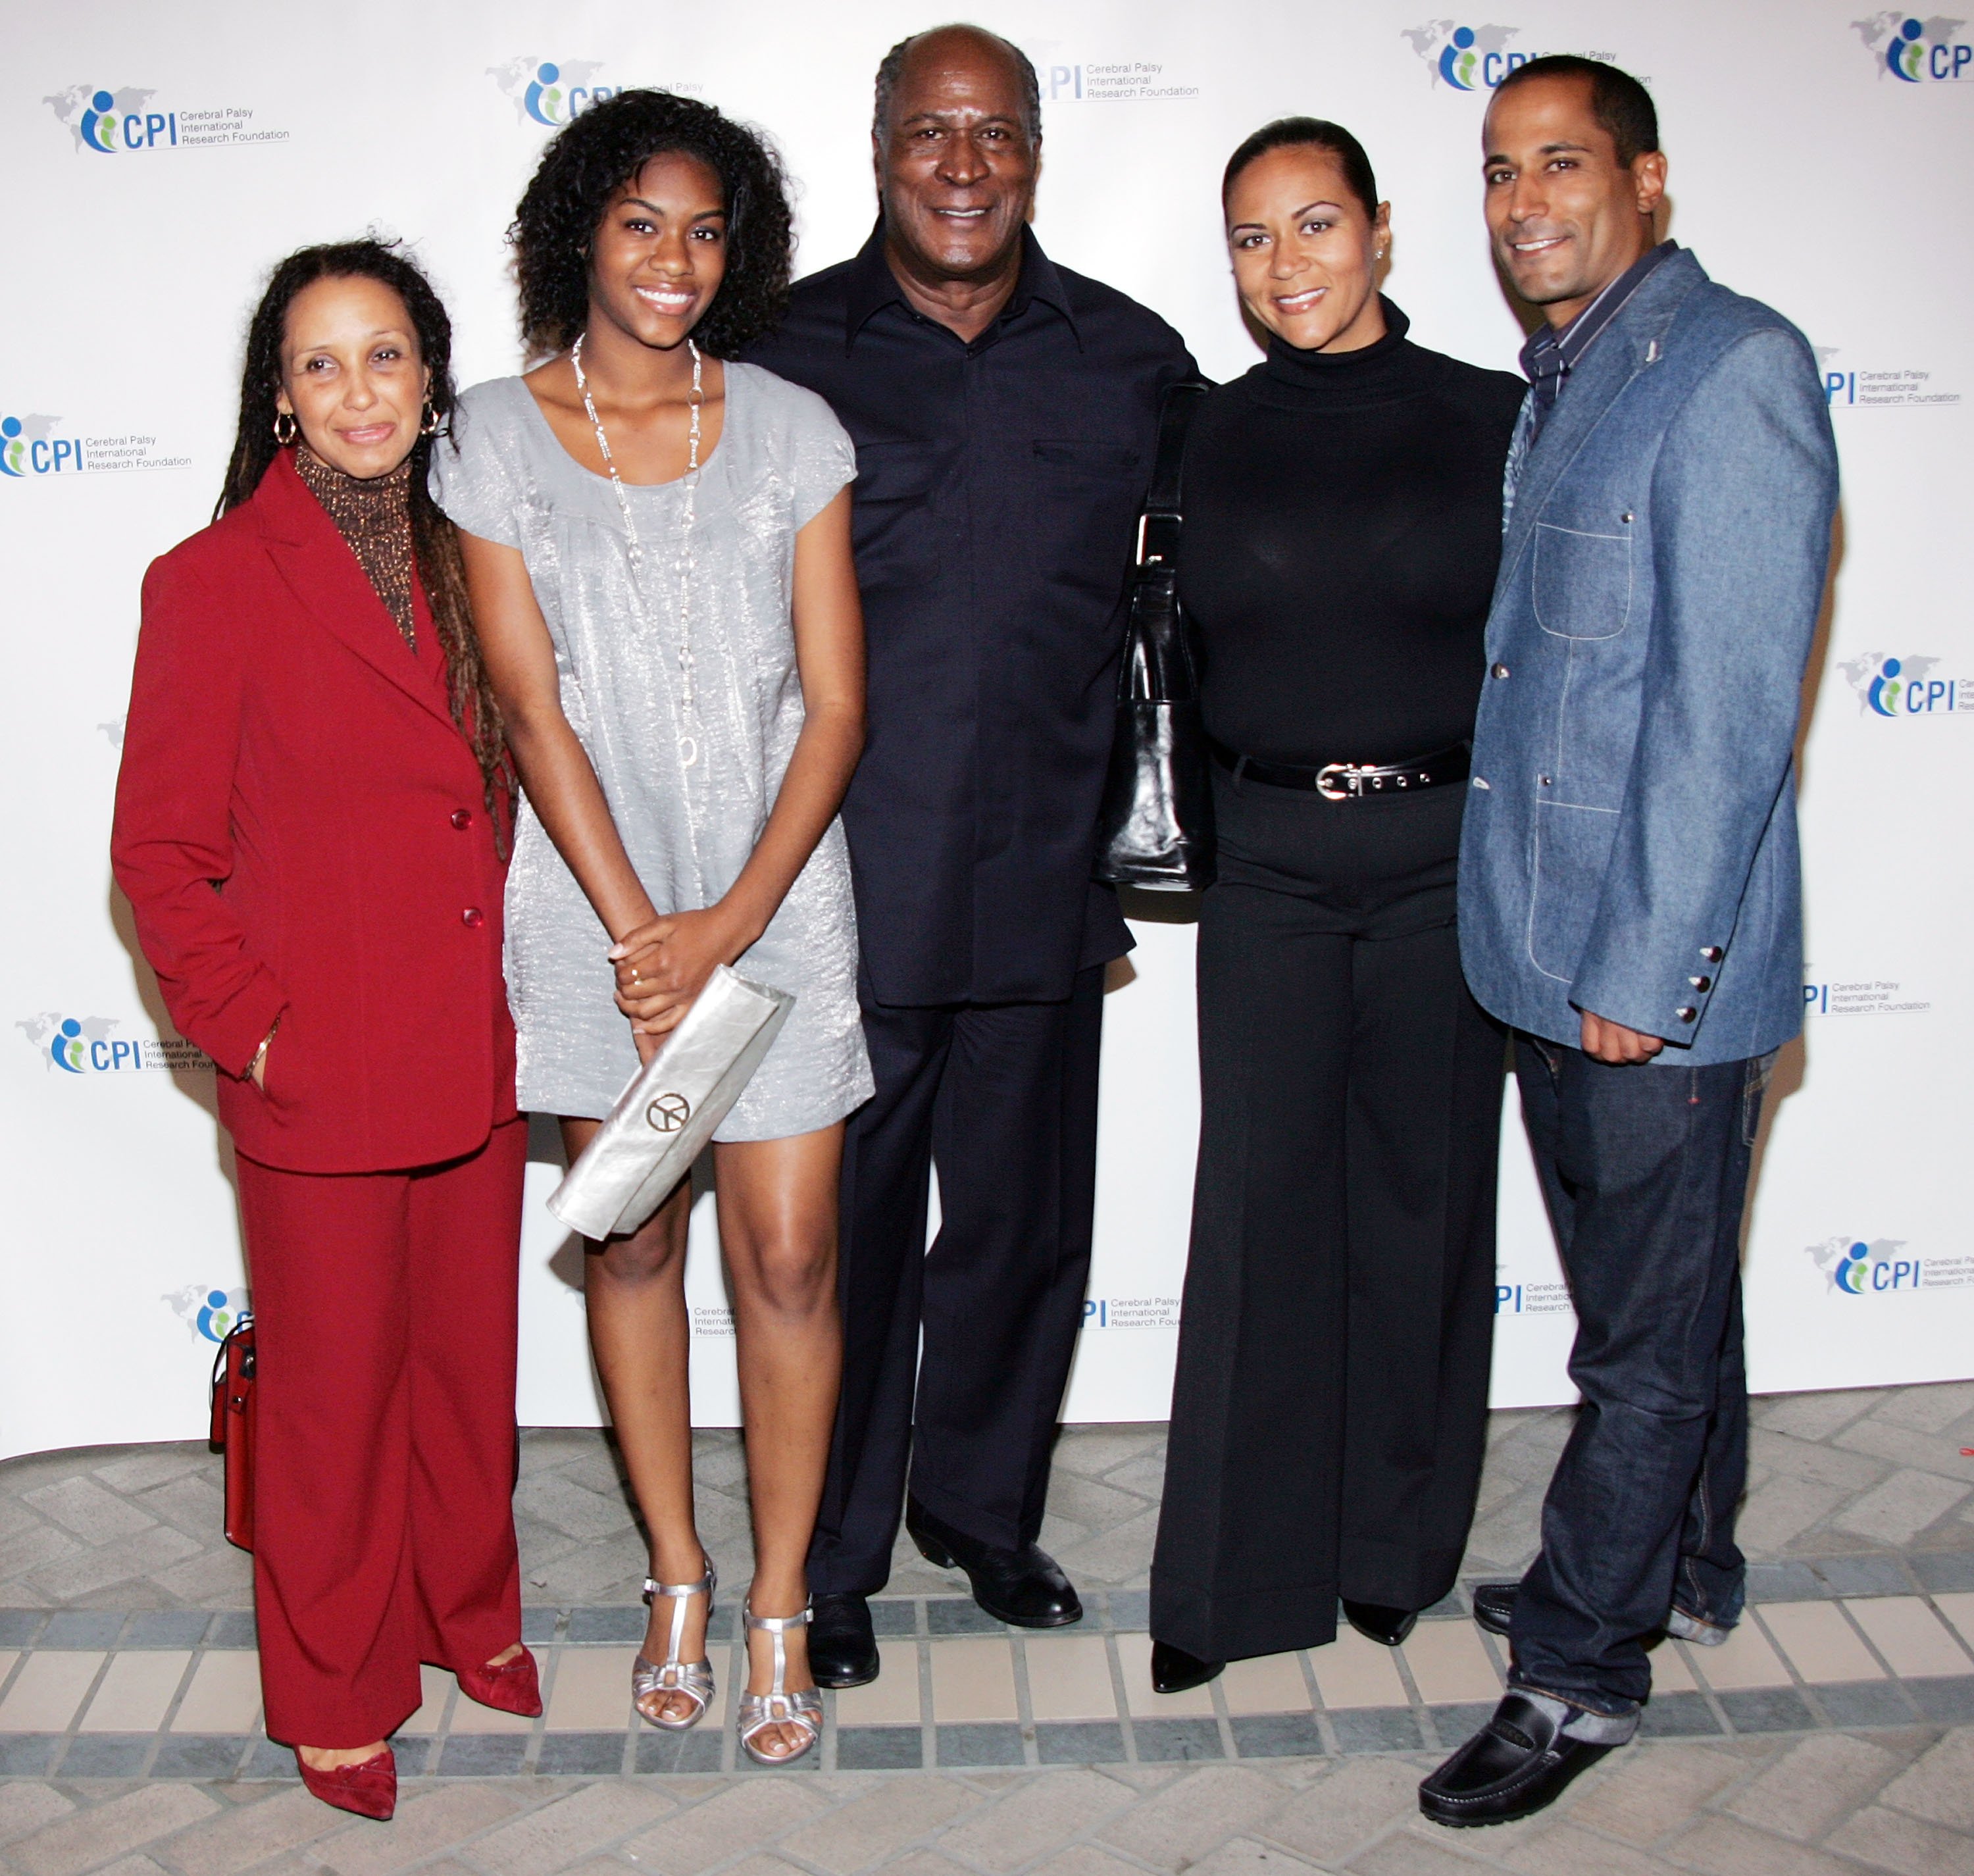 John Amos, Shannon Amos, KC Amos and friends in Los Angeles on December 3, 2008. | Photo: Getty Images